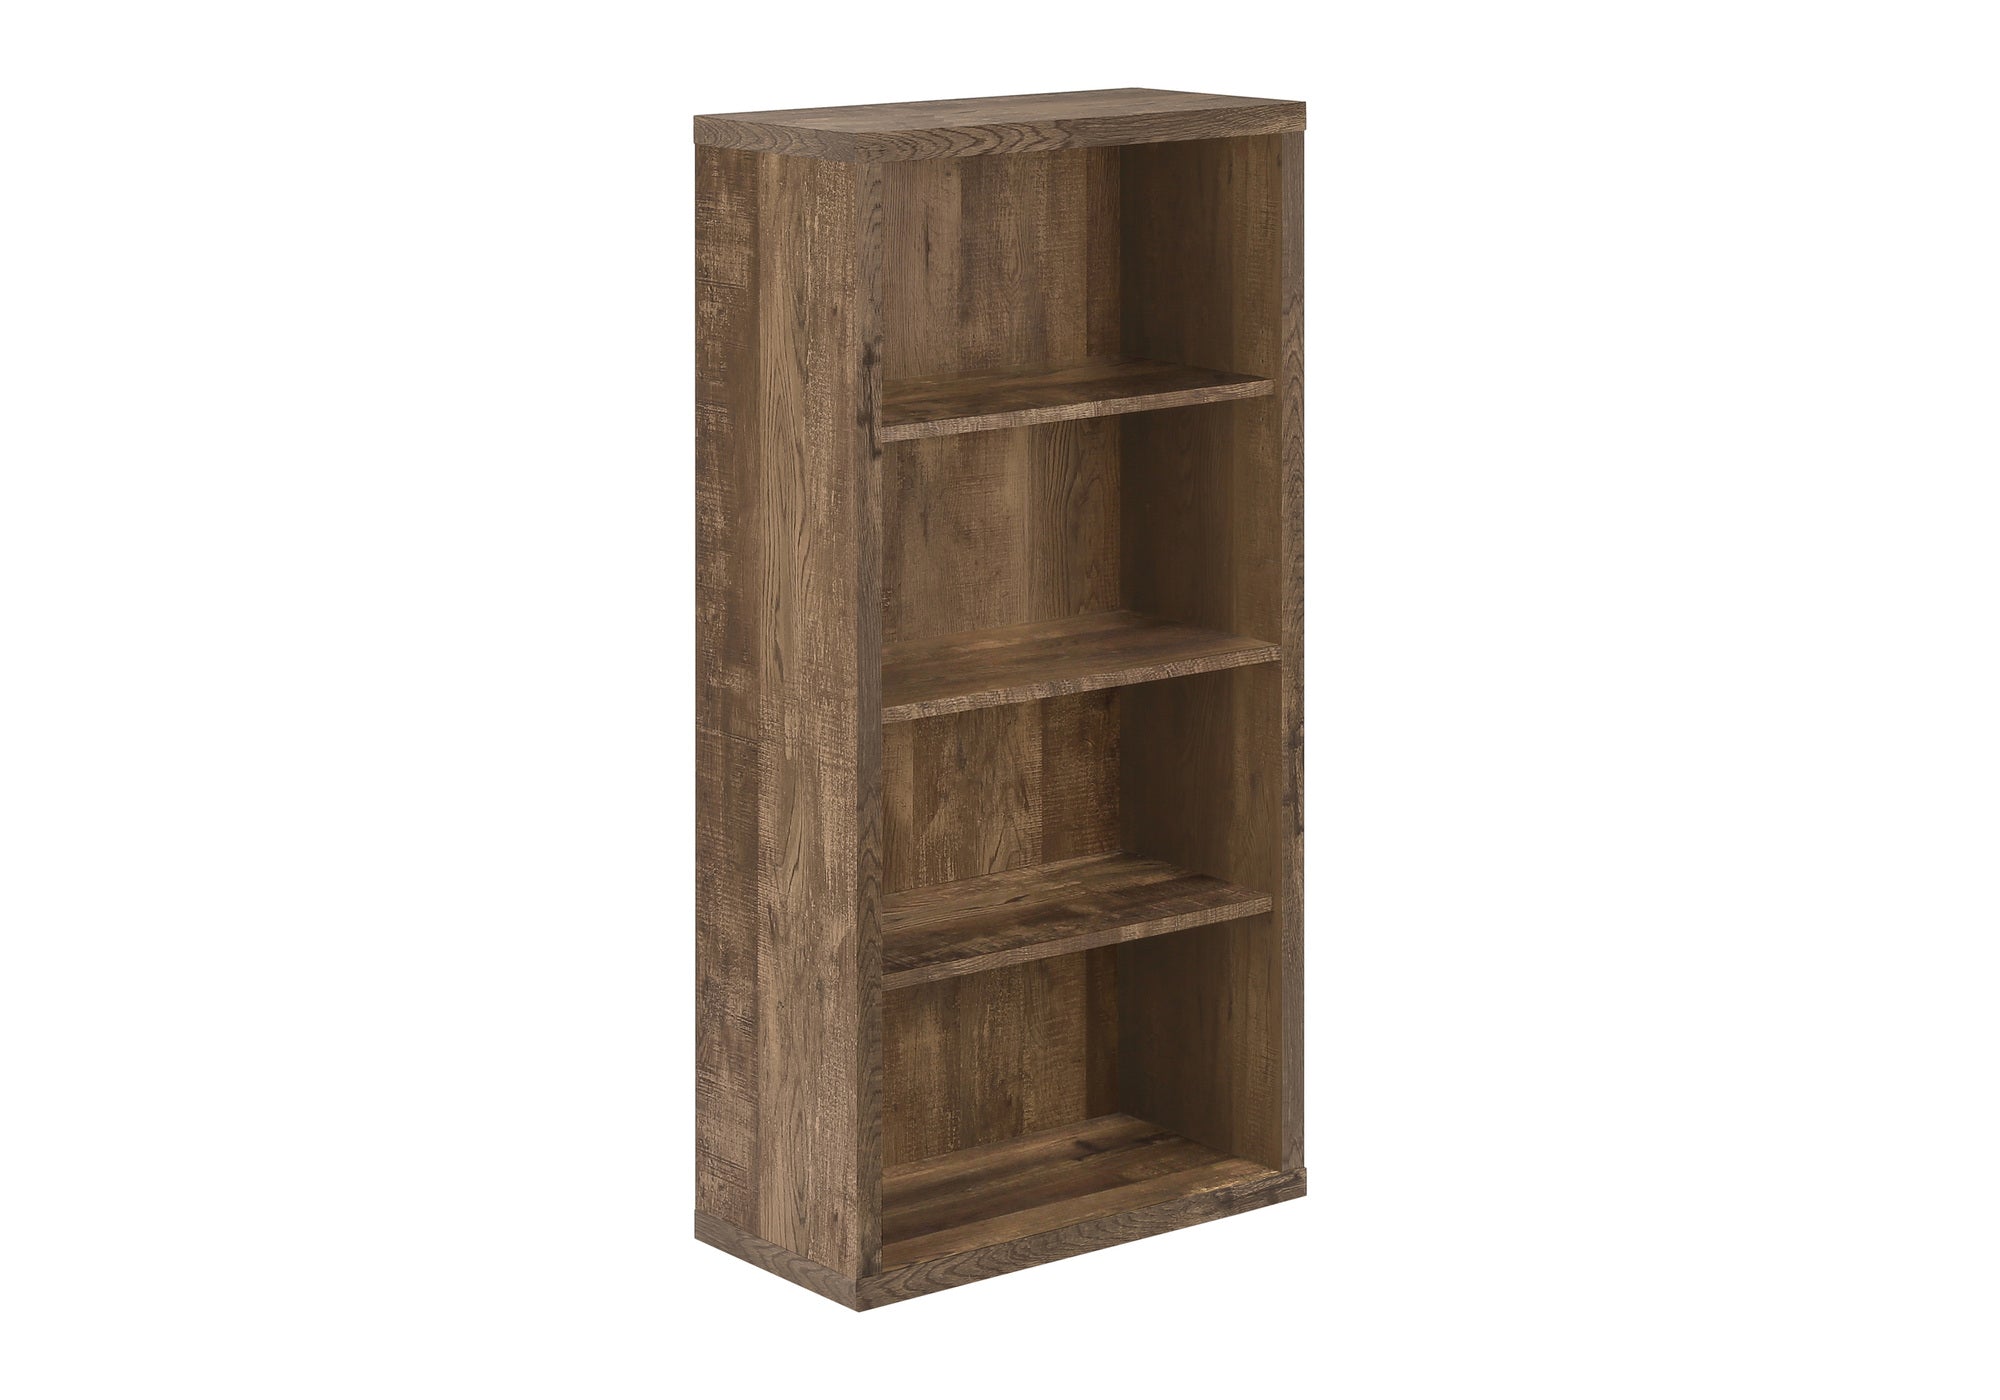 48" H Reclaimed Brown 4 Shelf BookCase With Adjustable Shelves